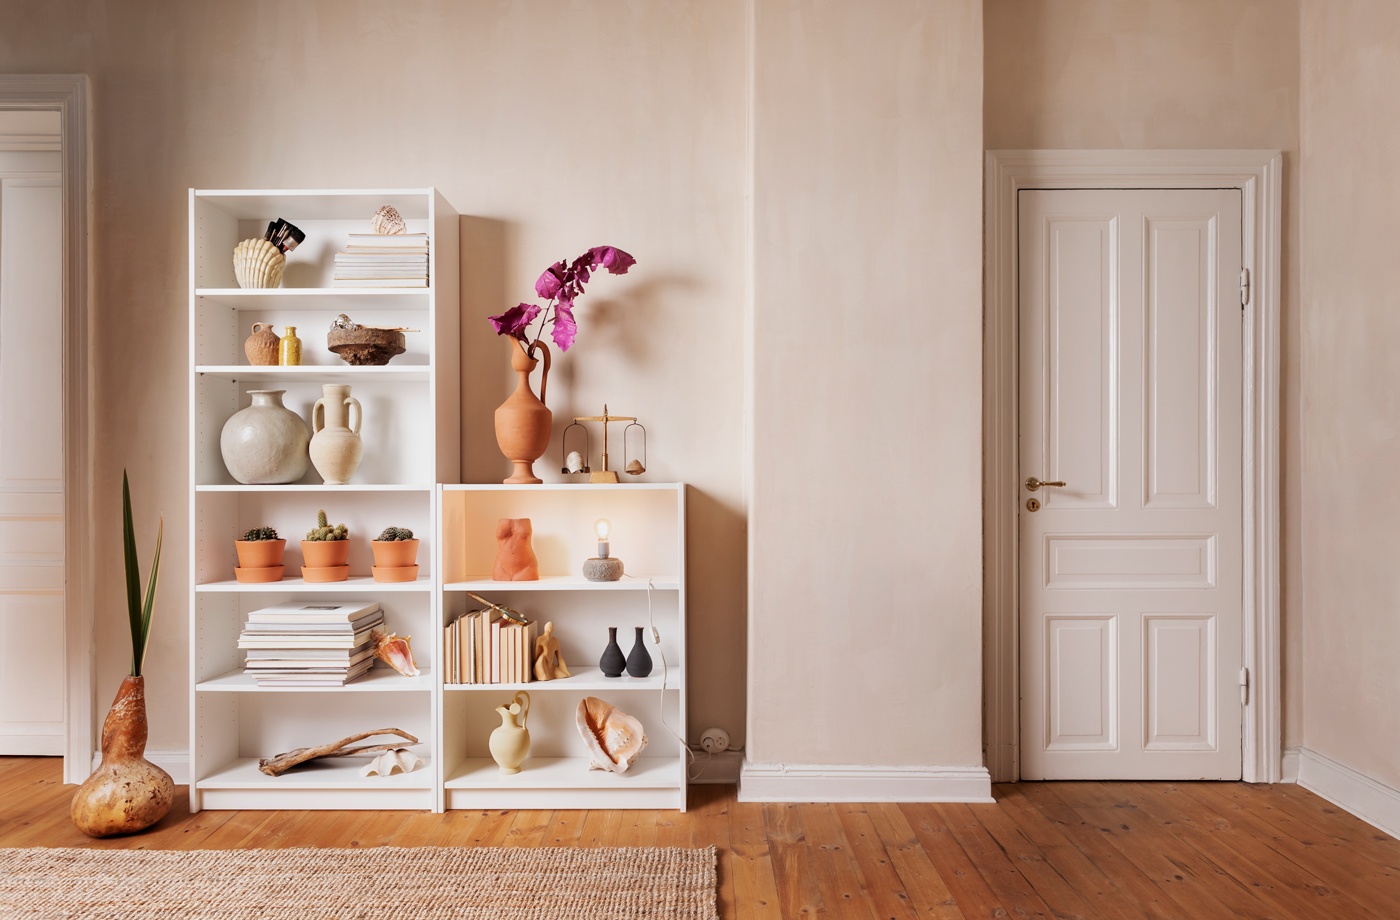 IKEA’s Billy bookcase is 40 years old! Here are 8 hacks that totally transform it